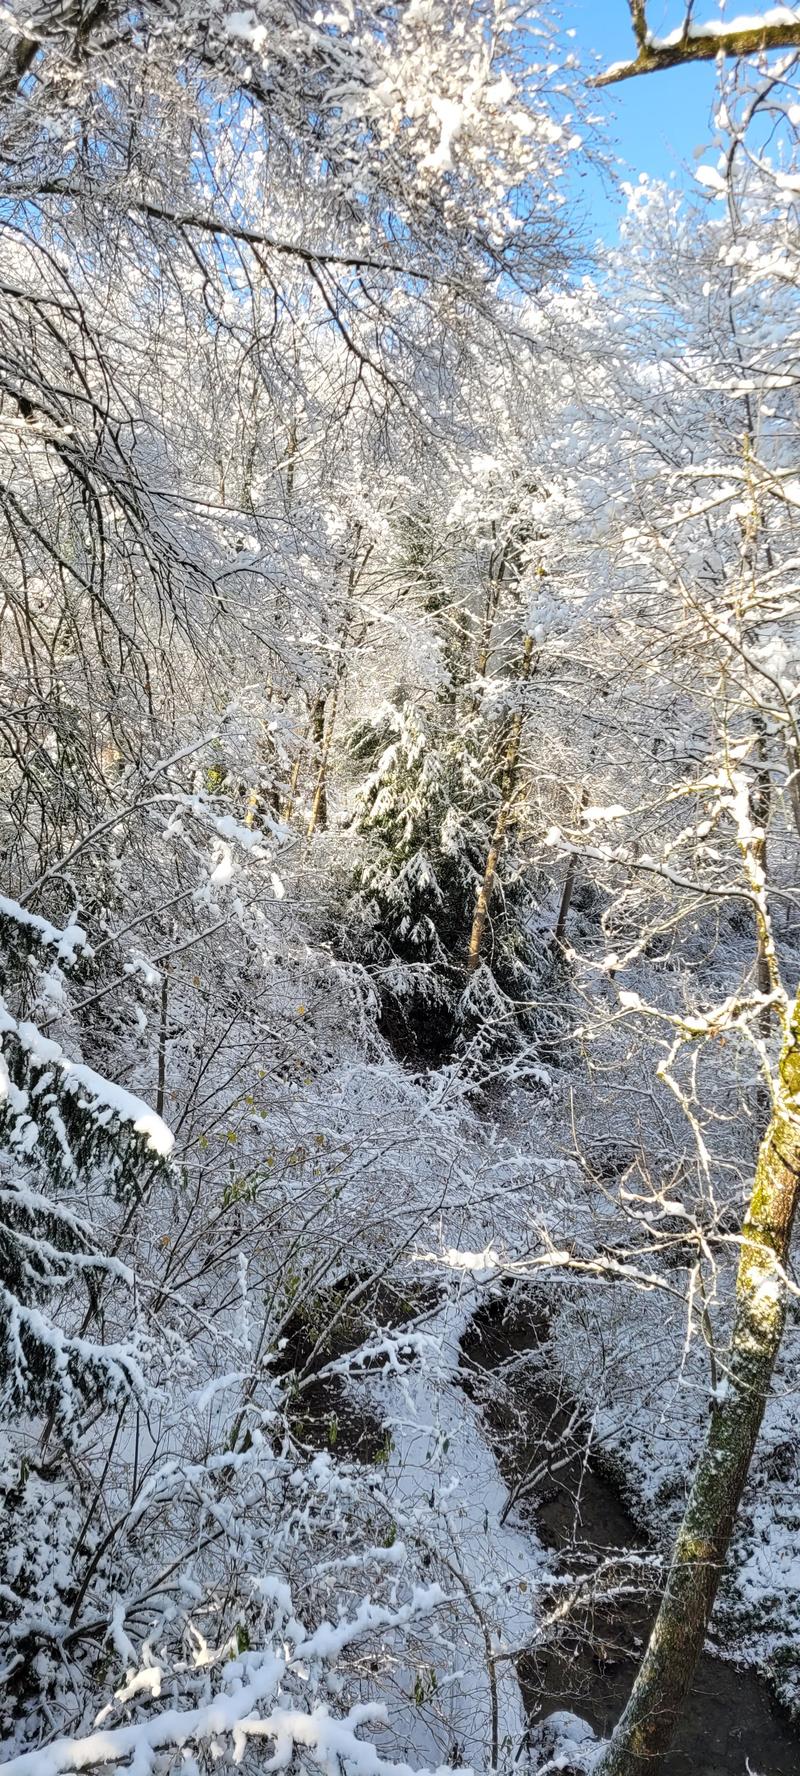 the brooklet in the snowy wood